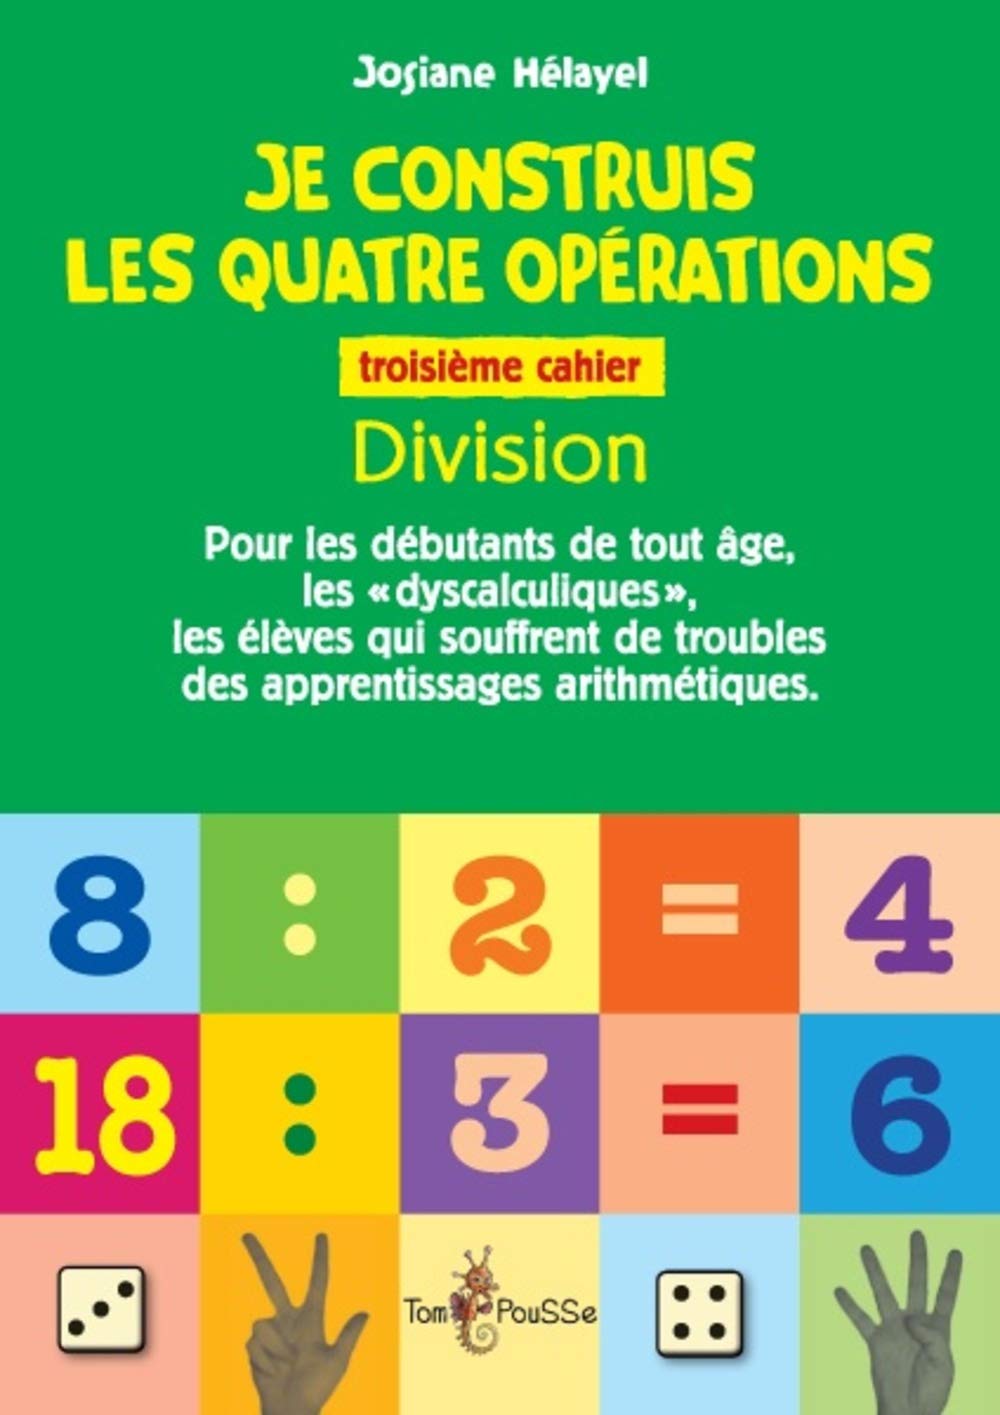 cahier faire divisions